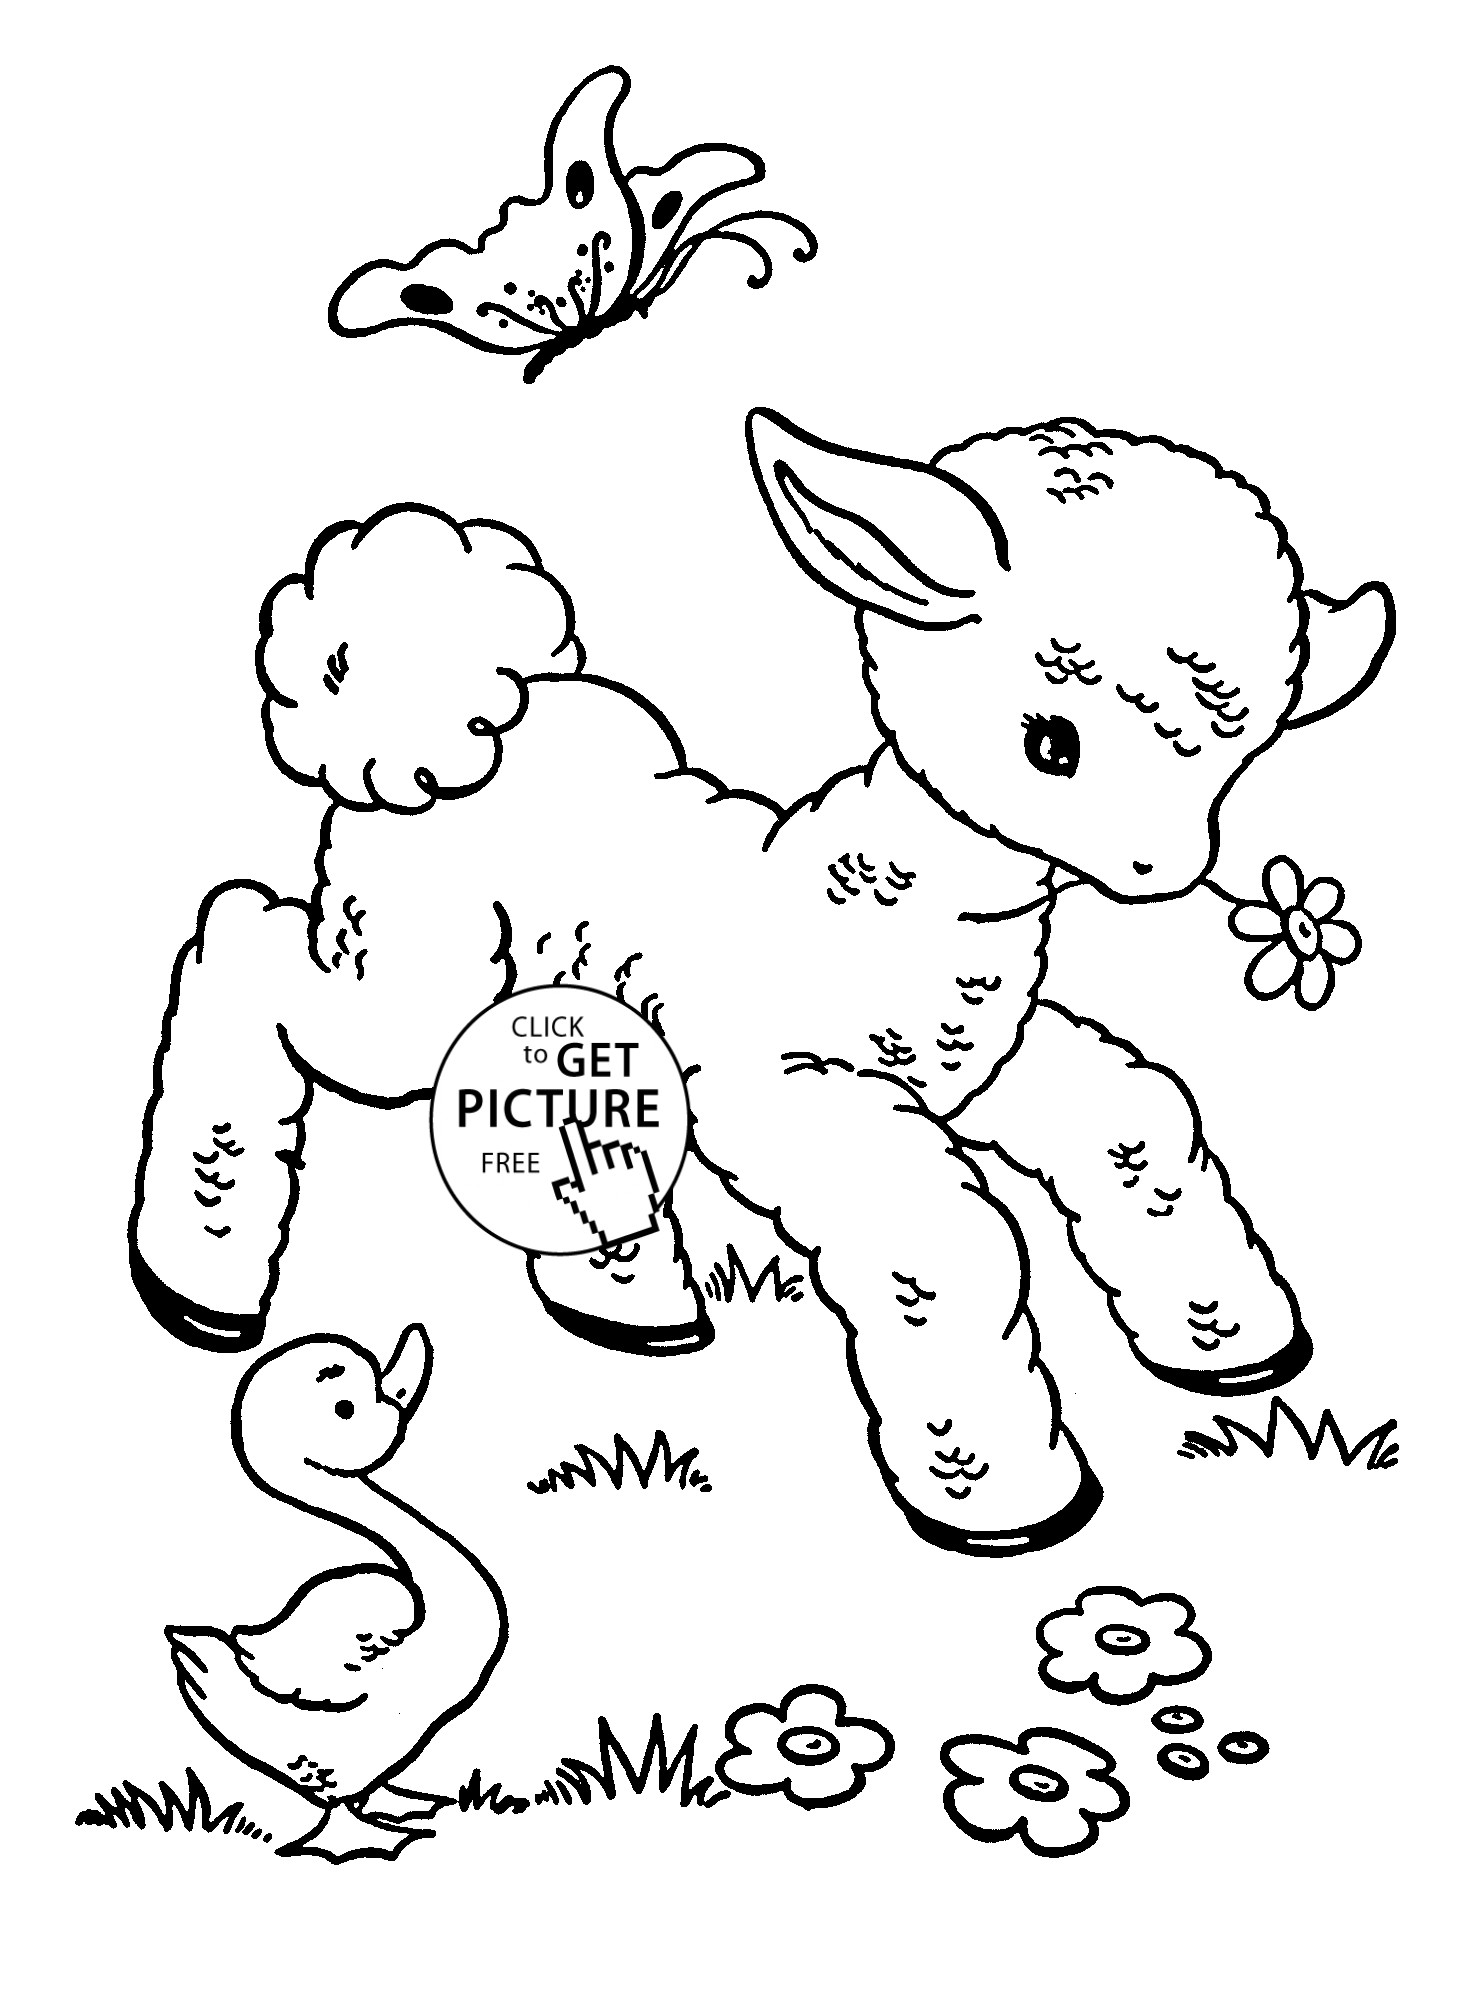 Printable Animal Coloring Pages For Kids
 Cute Baby Sheep animal coloring page for kids animal